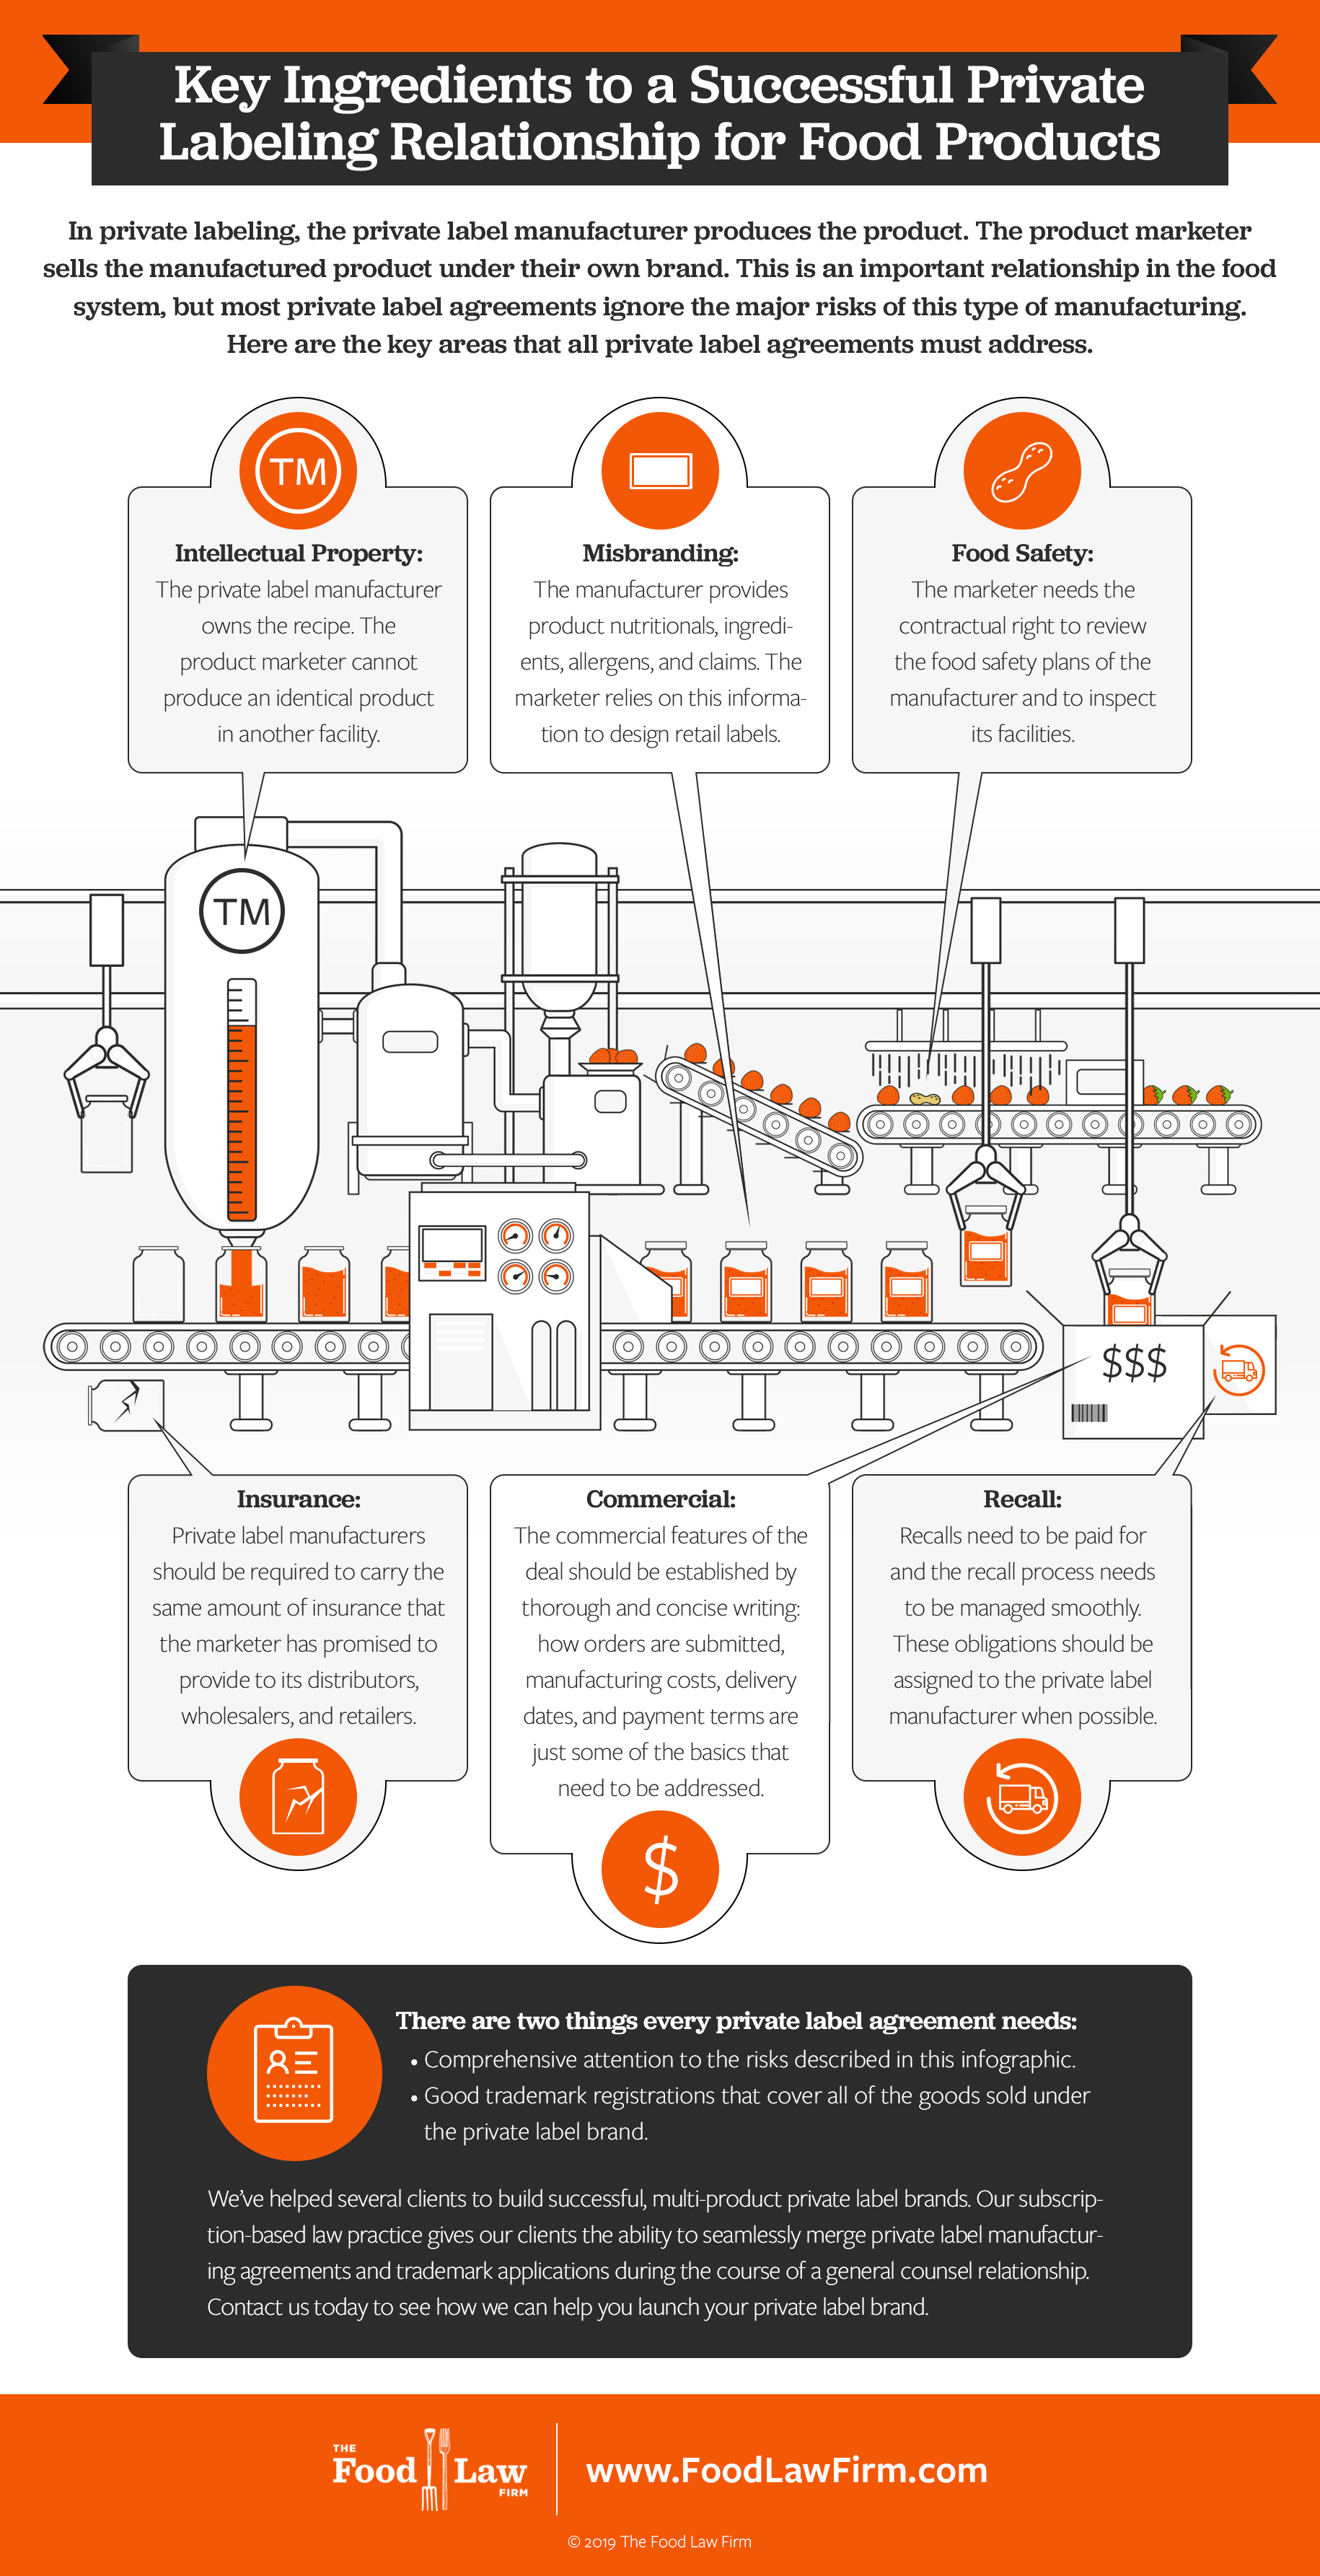 Key Ingredients to a Successful Private Labeling Relationship for Food Products.  Food Law Firm Infographic